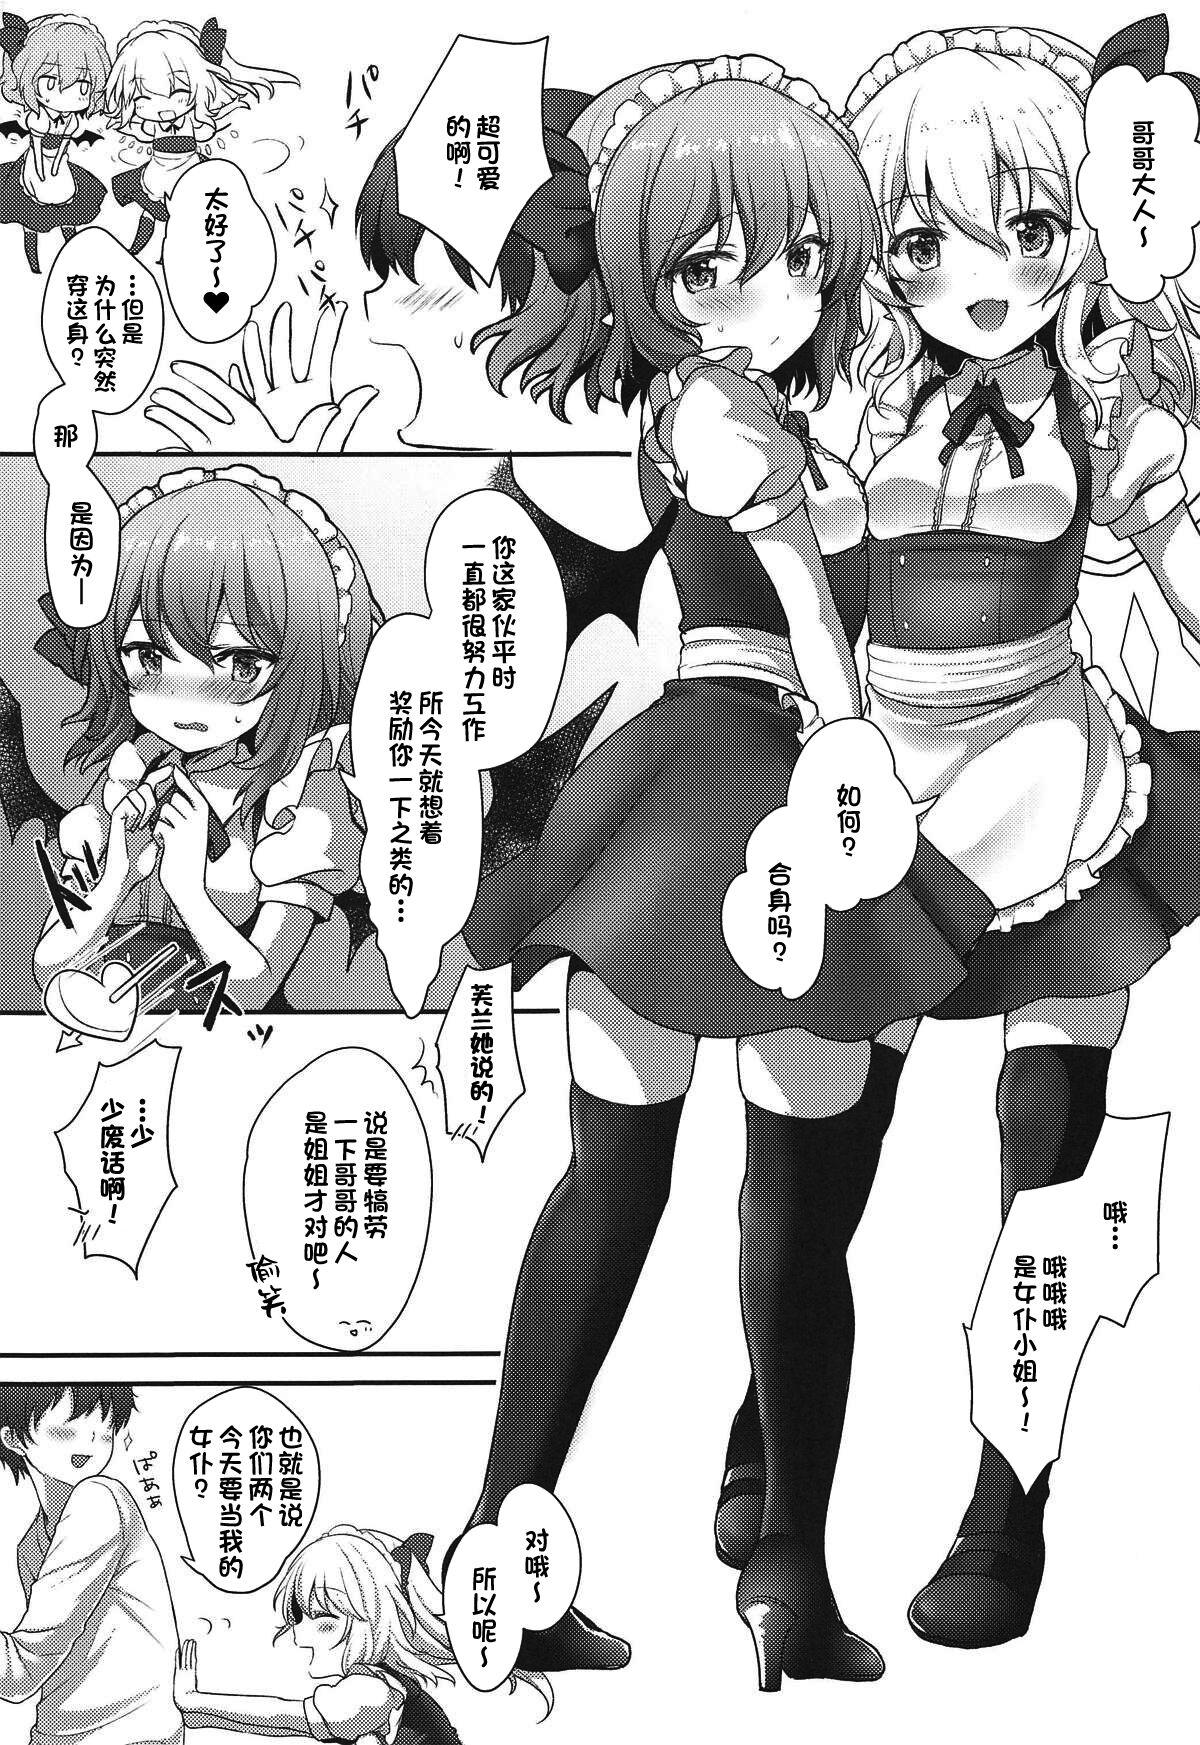 Hardcore Porn Maid Scarlet - Touhou project Pussy Sex - Page 4